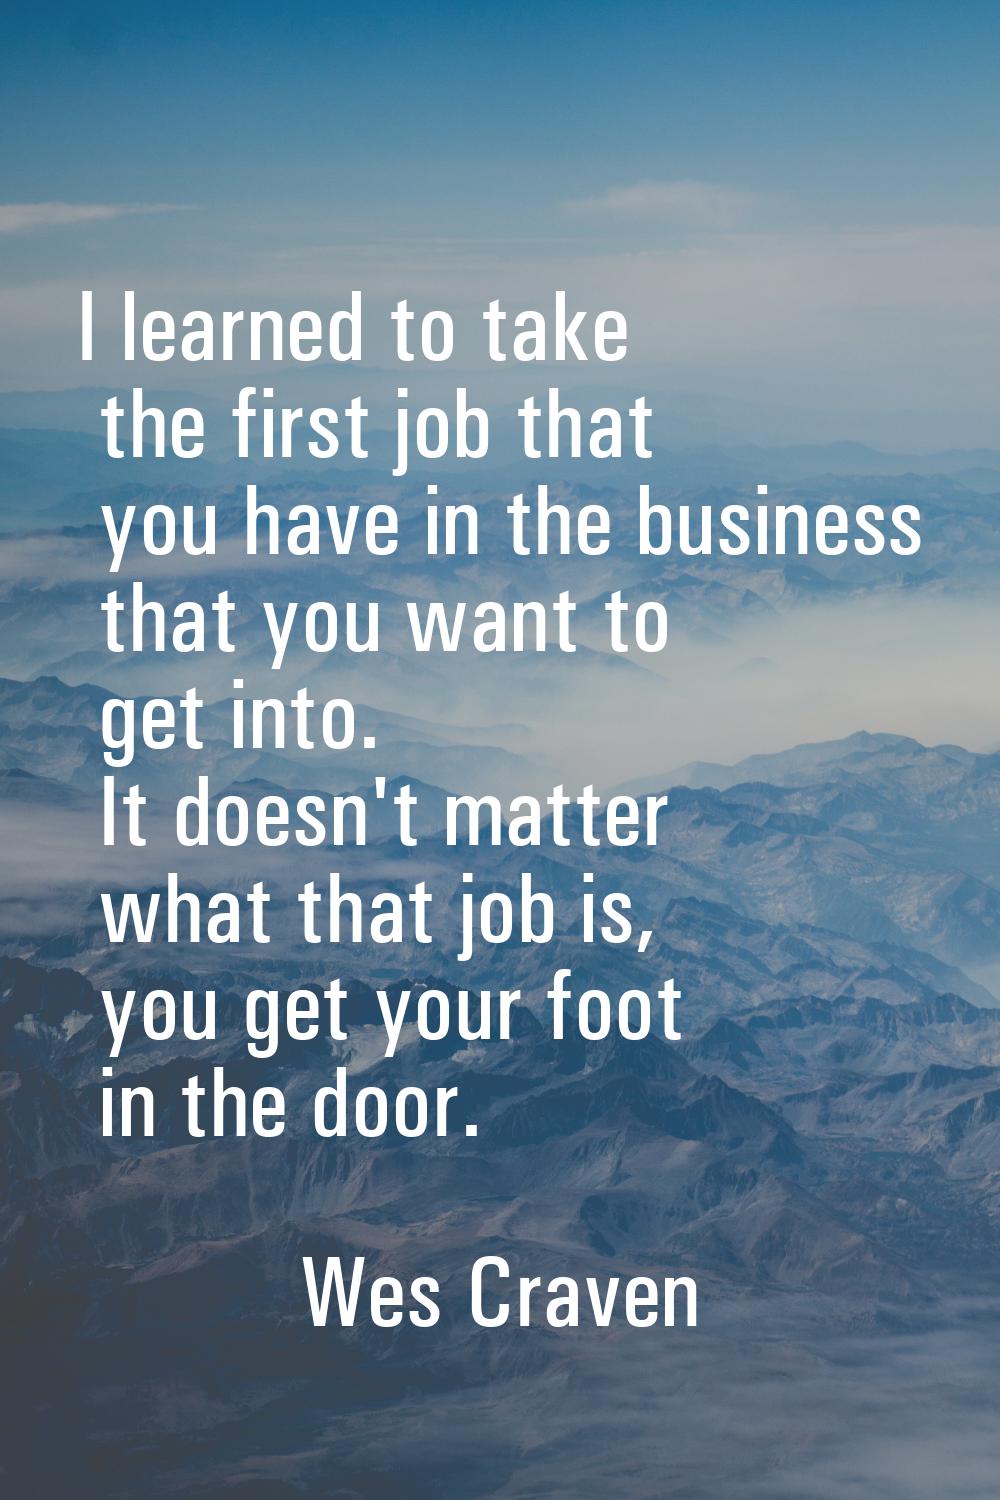 I learned to take the first job that you have in the business that you want to get into. It doesn't